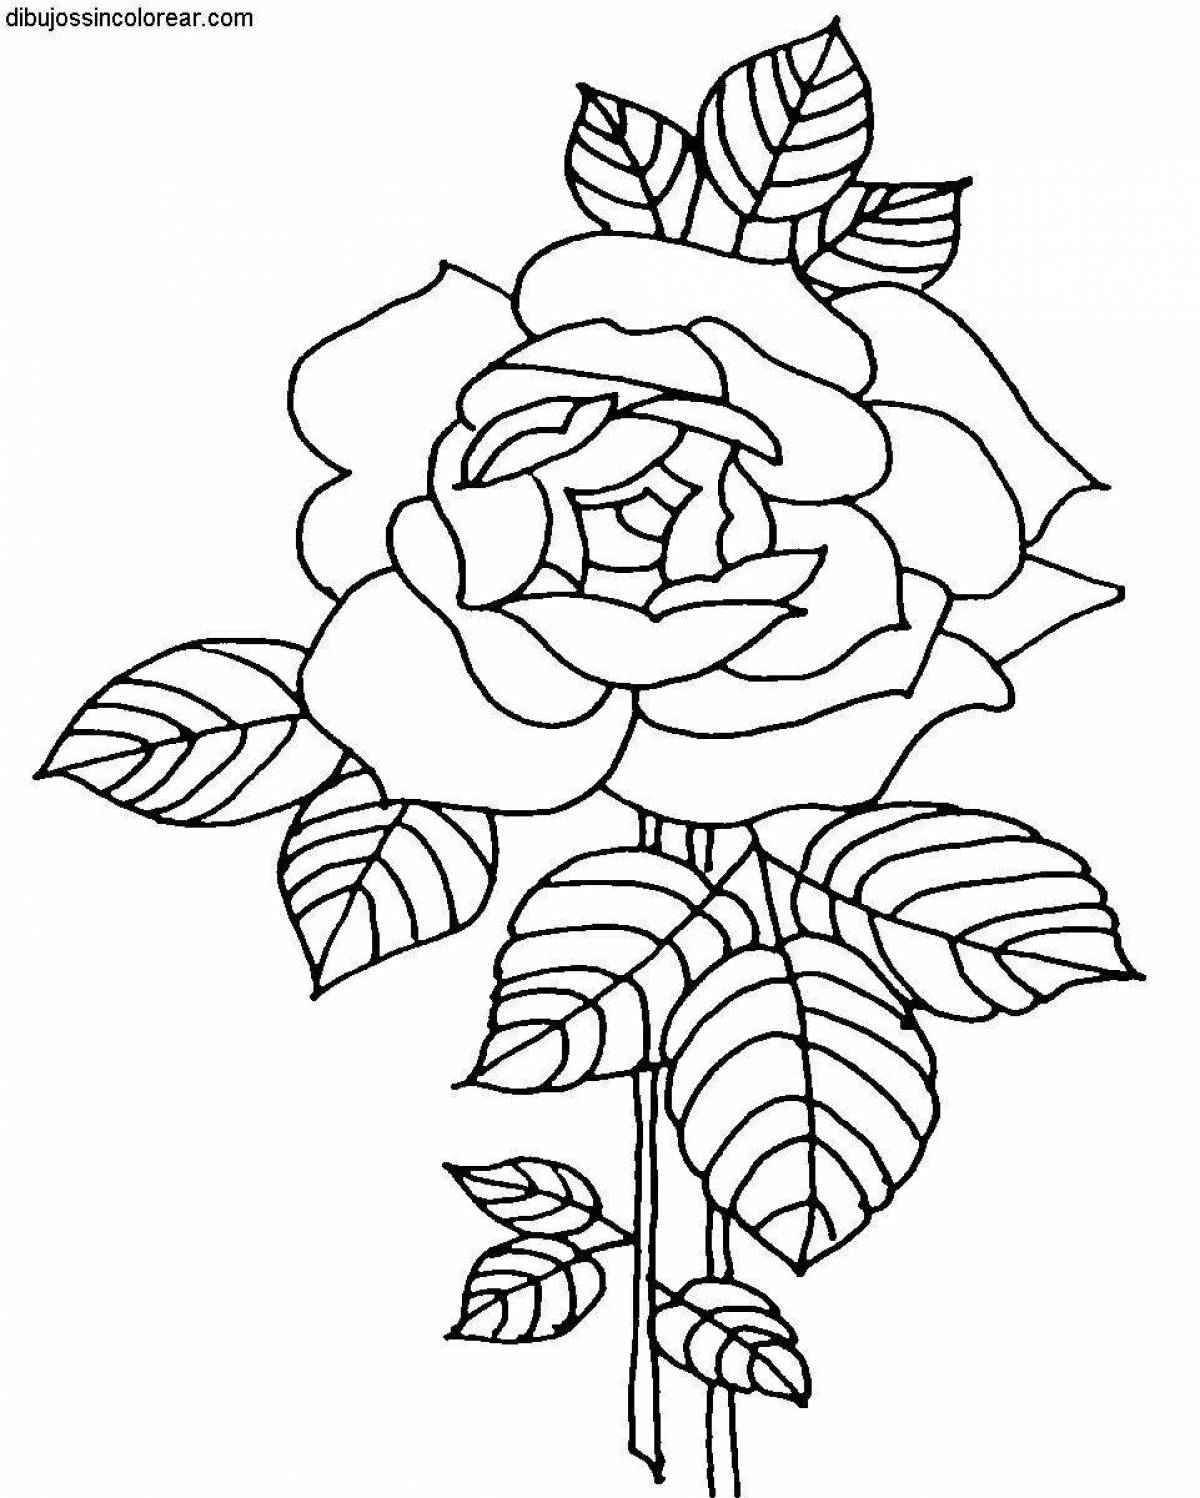 Violent coloring roses for children 5-6 years old